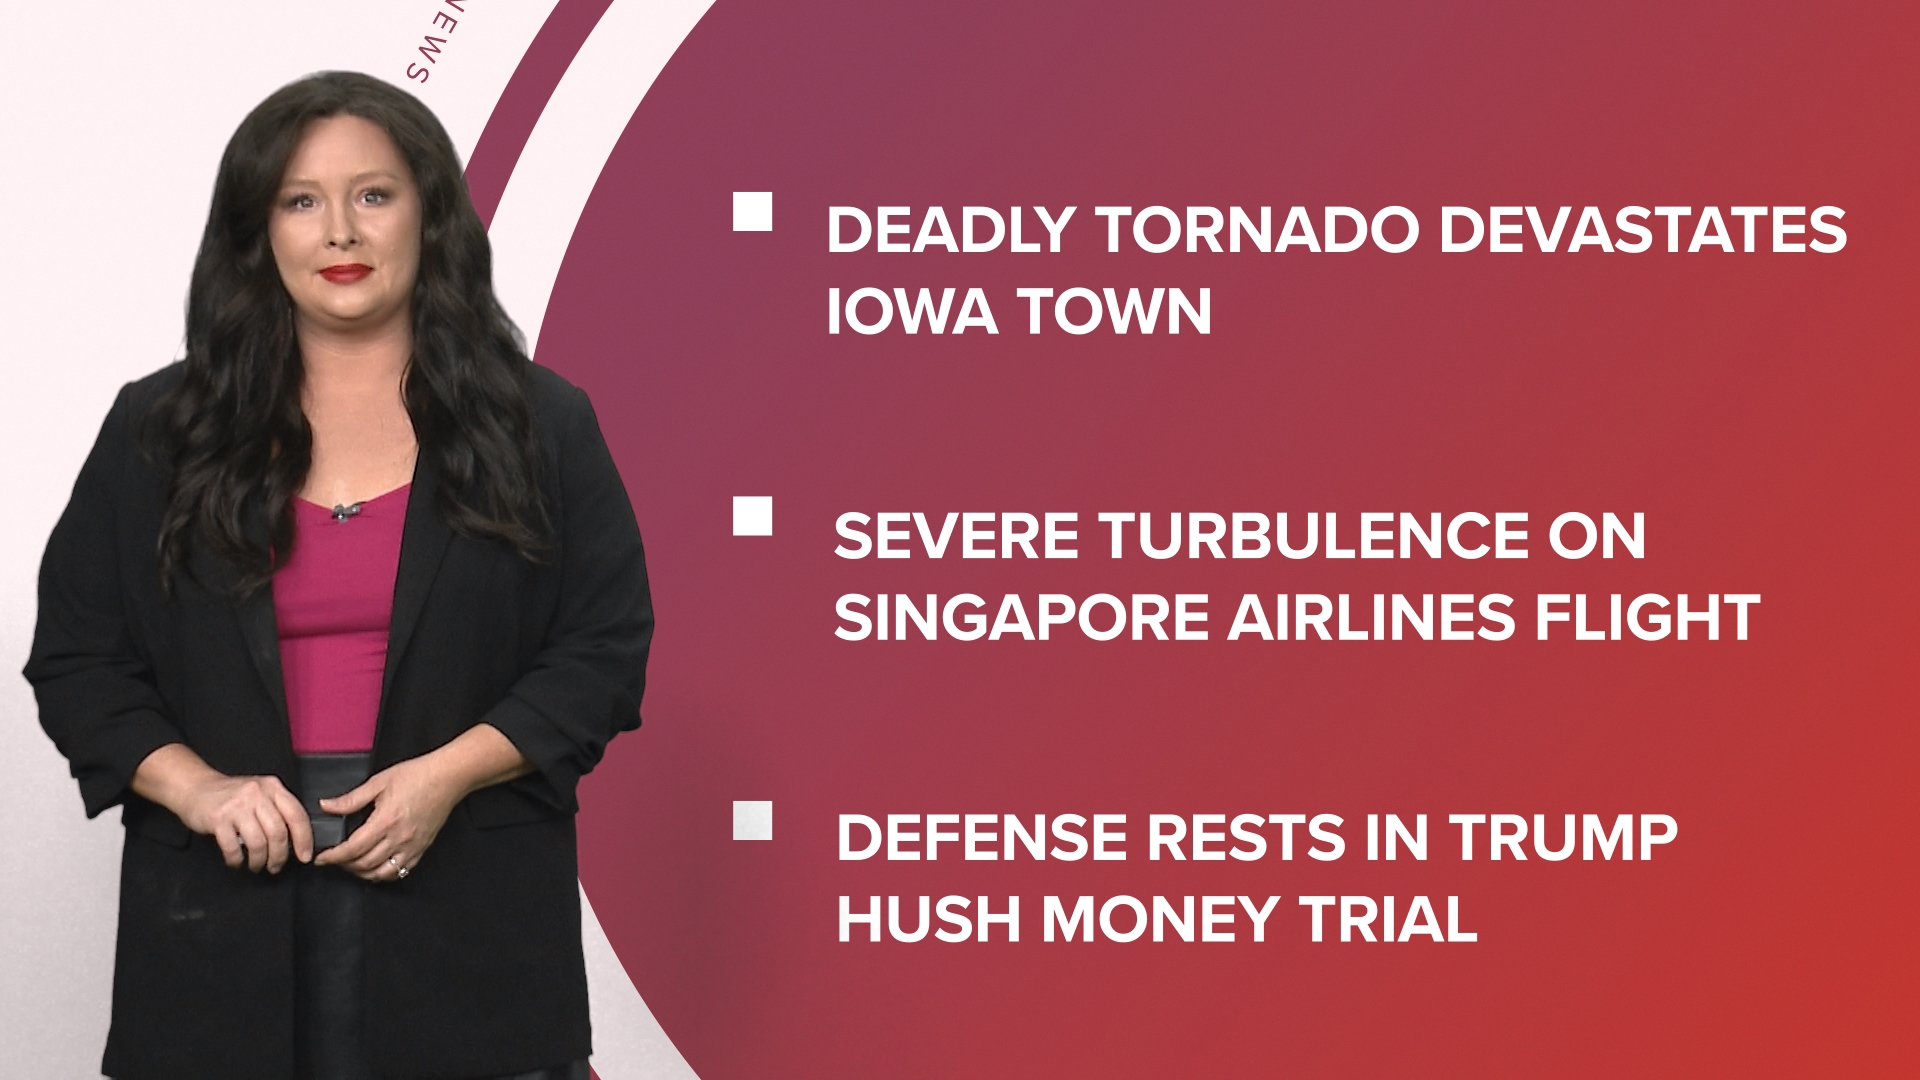 A look at what is happening in the news from deadly tornadoes hit Iowa to the defense rests in Trump's hush money trial and Memorial Day travel tips.